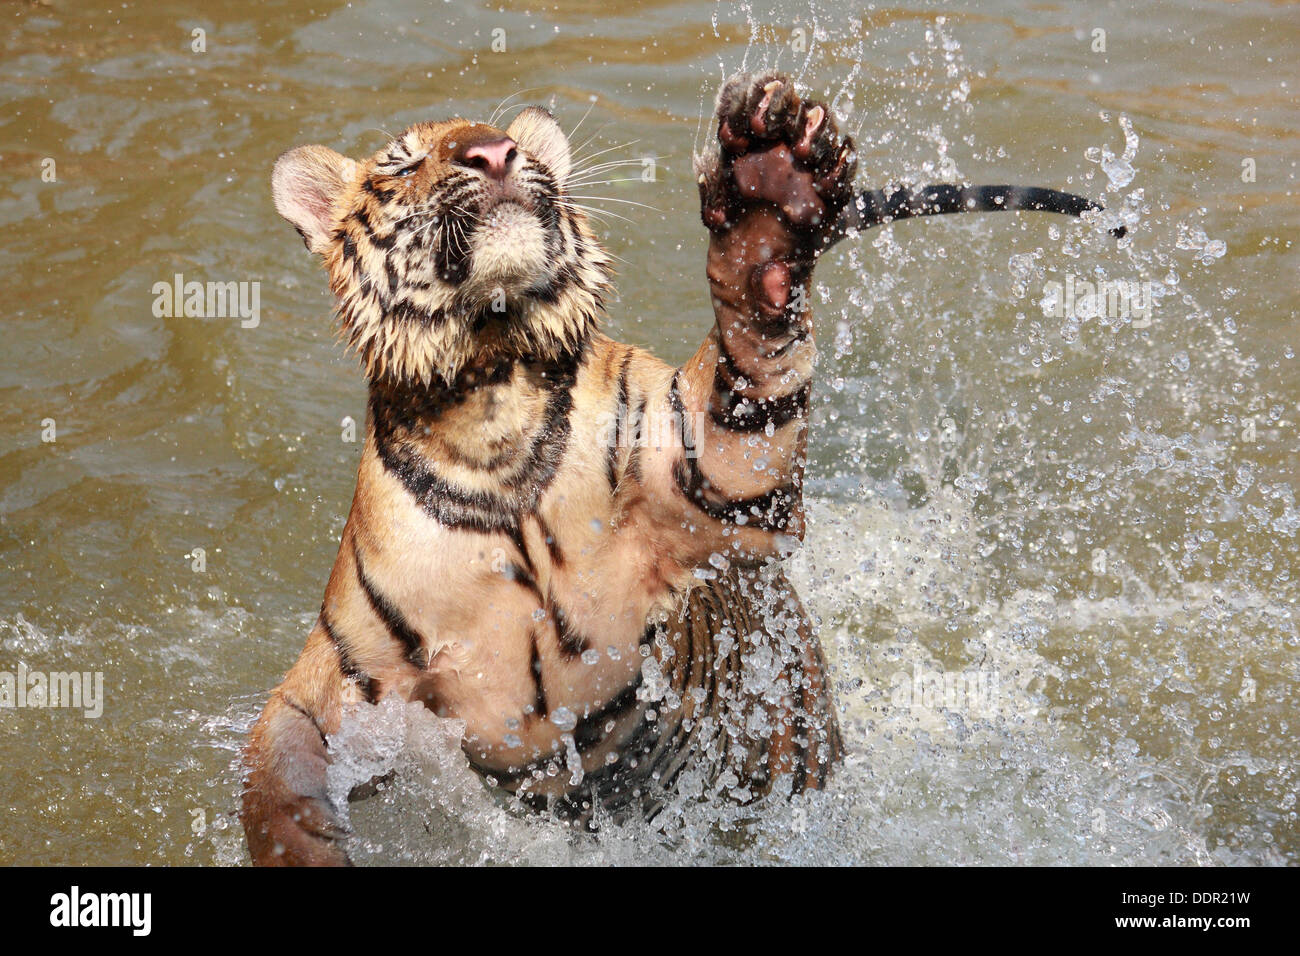 Tiger is jumping in pond Stock Photo